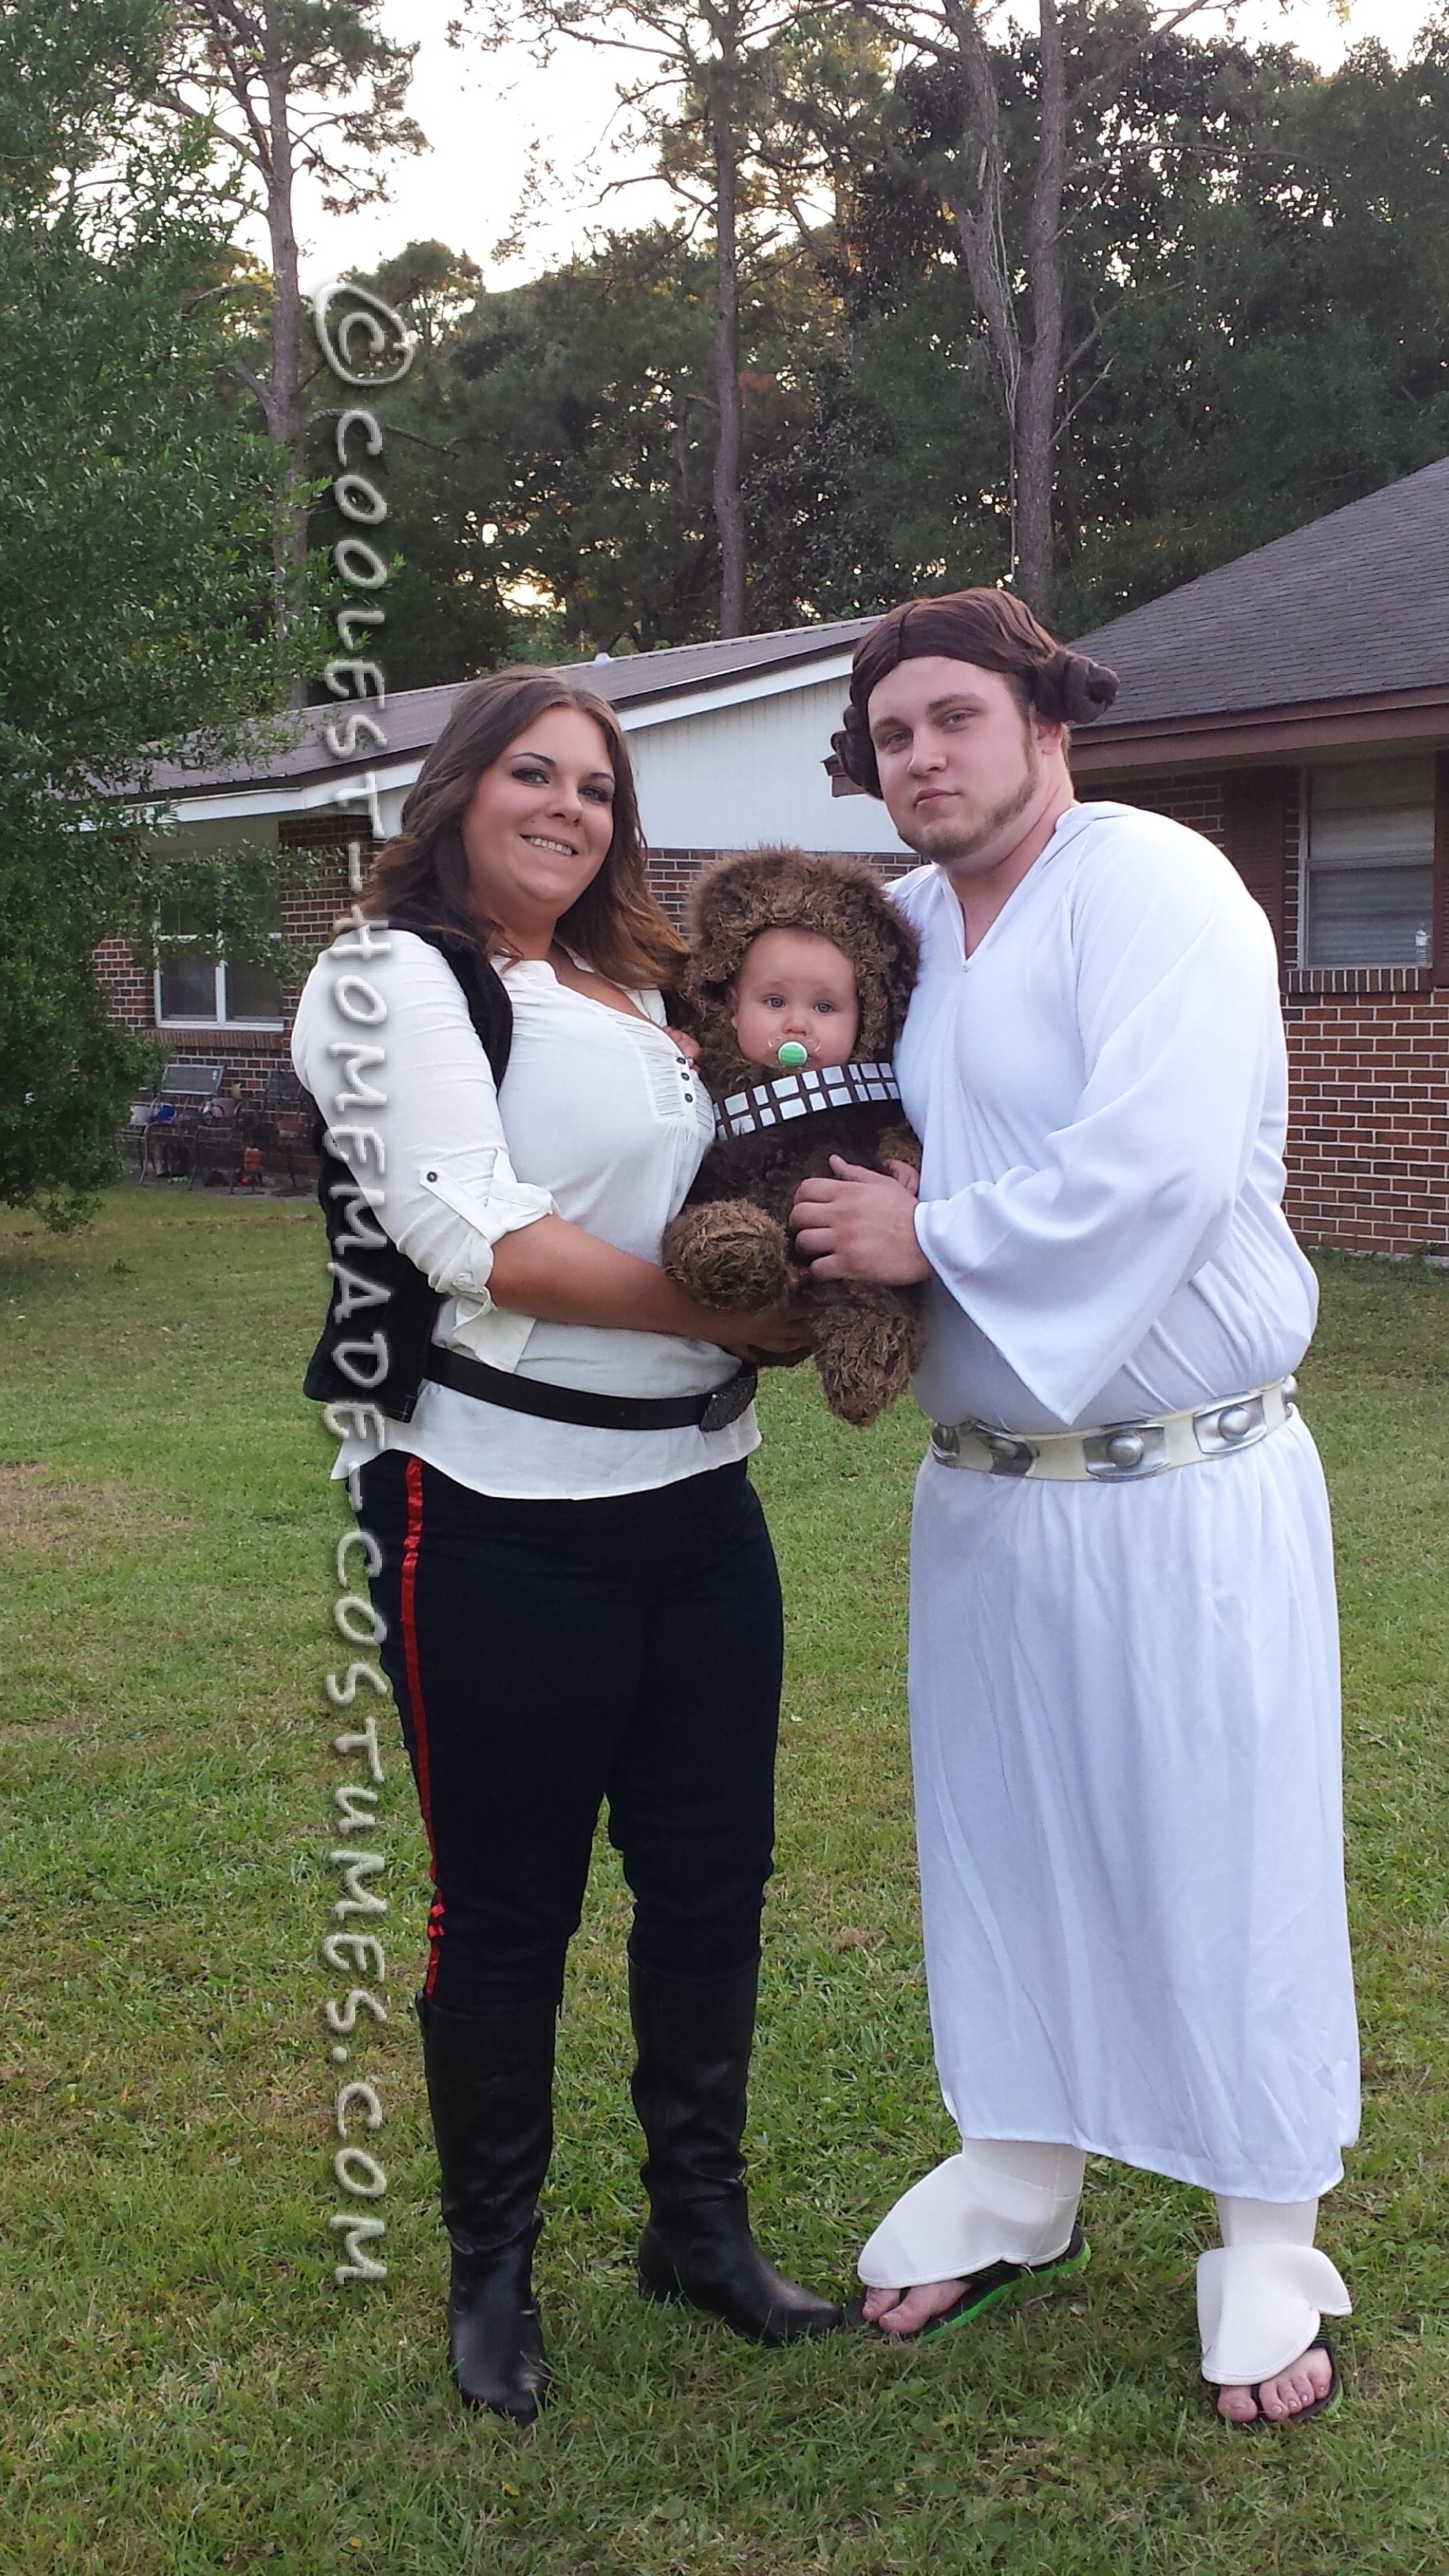 Cool Family Star Wars Costume